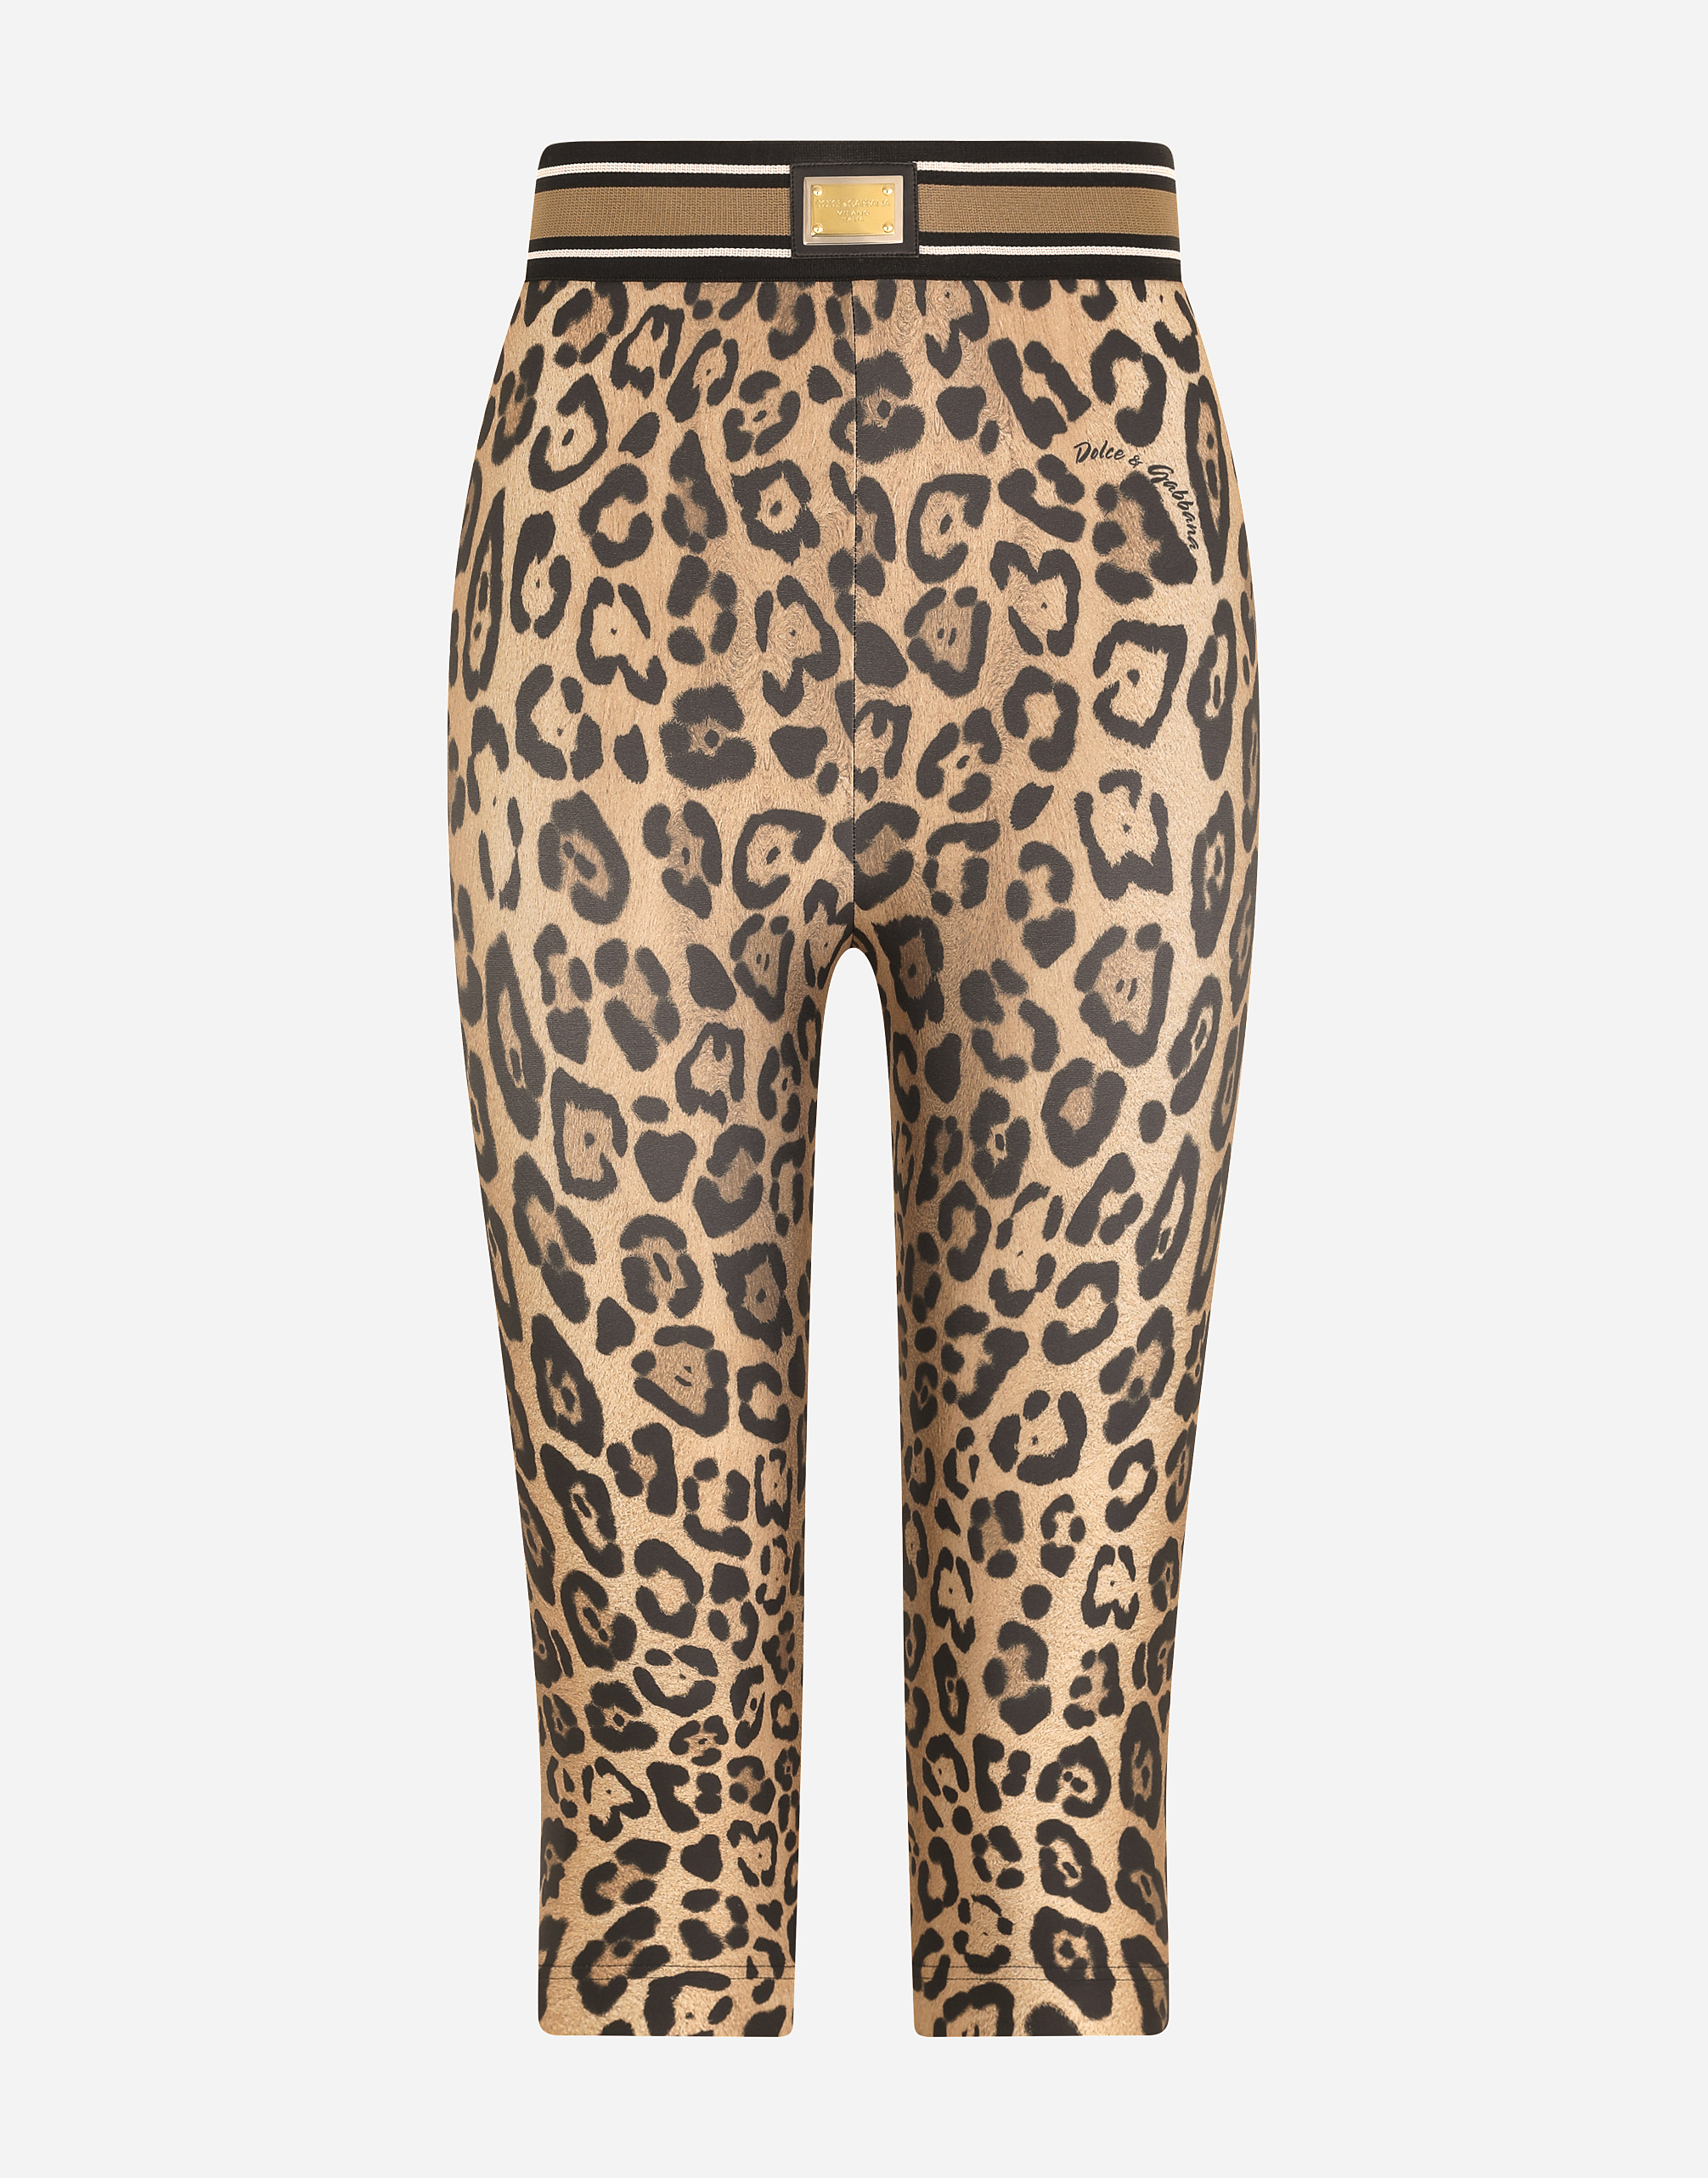 Leopard-print spandex/jersey cycling shorts in Multicolor